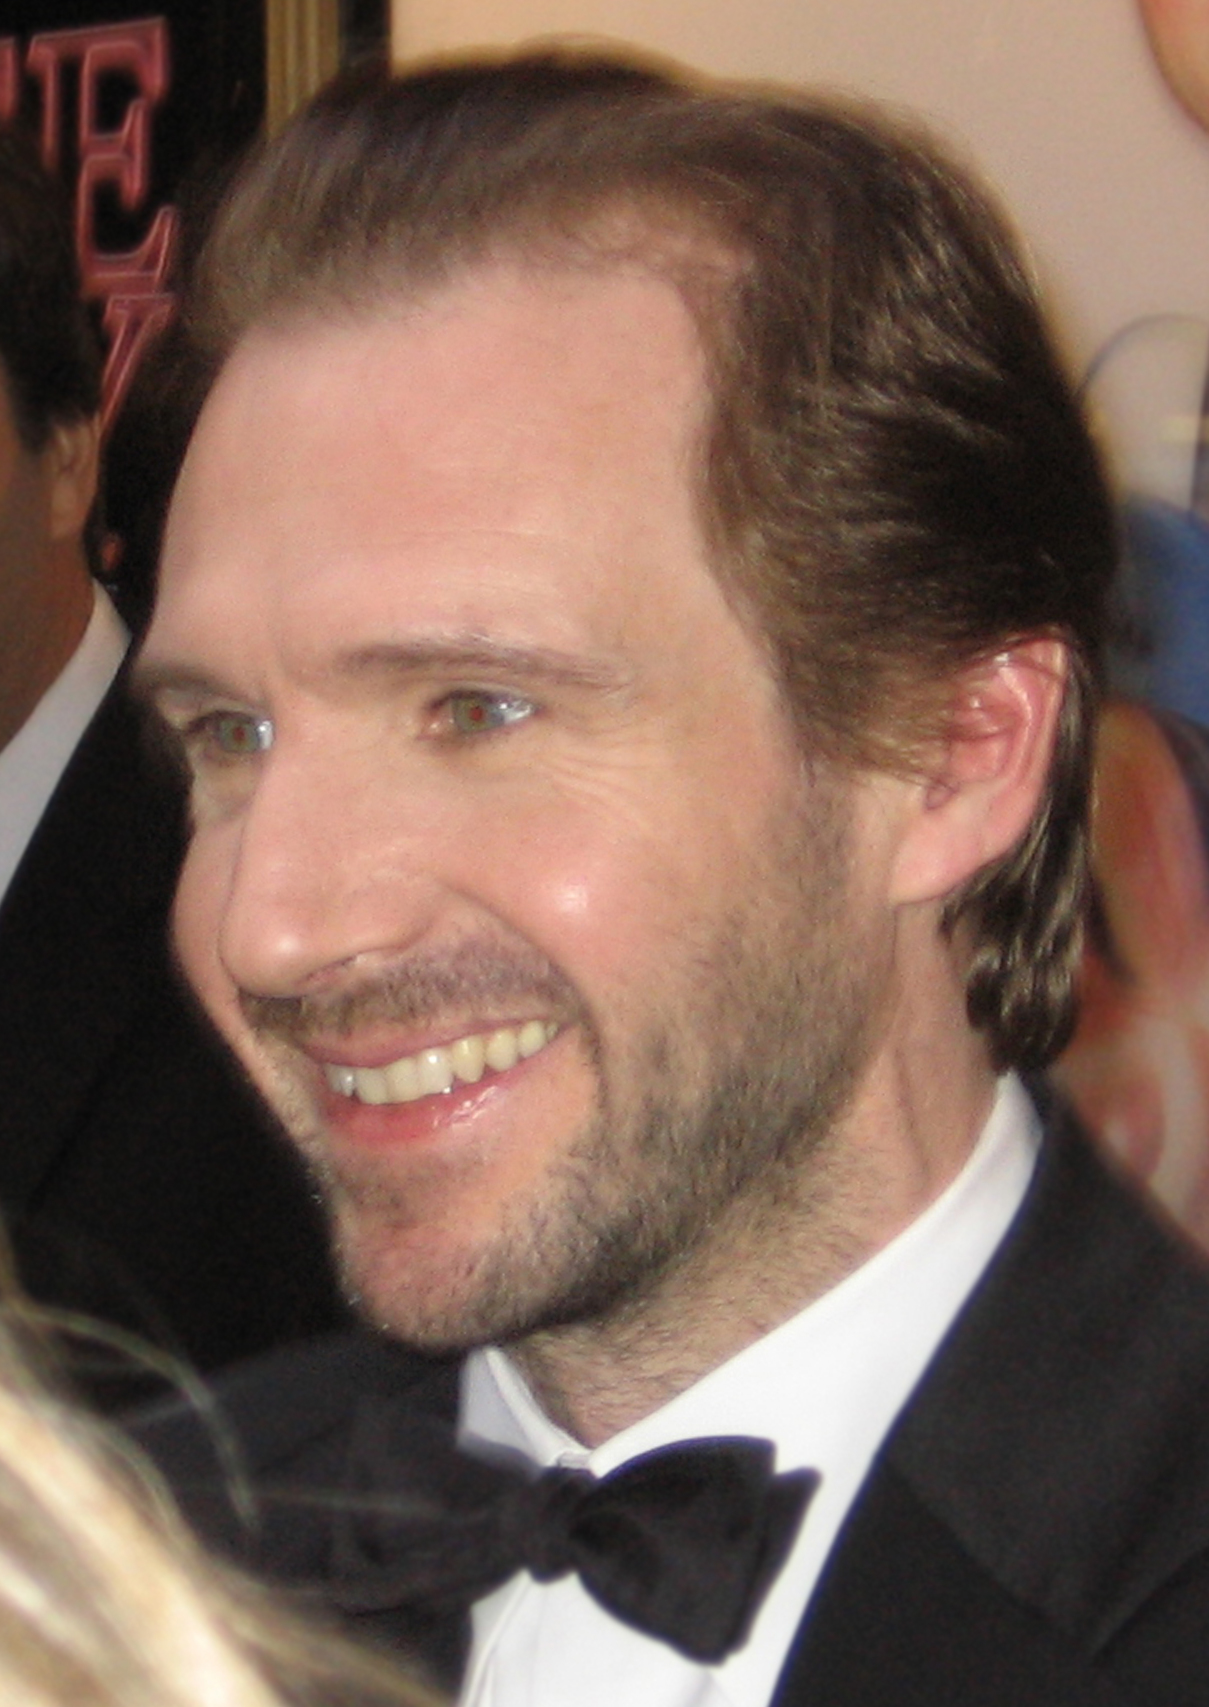 Ralph Fiennes, out of costume